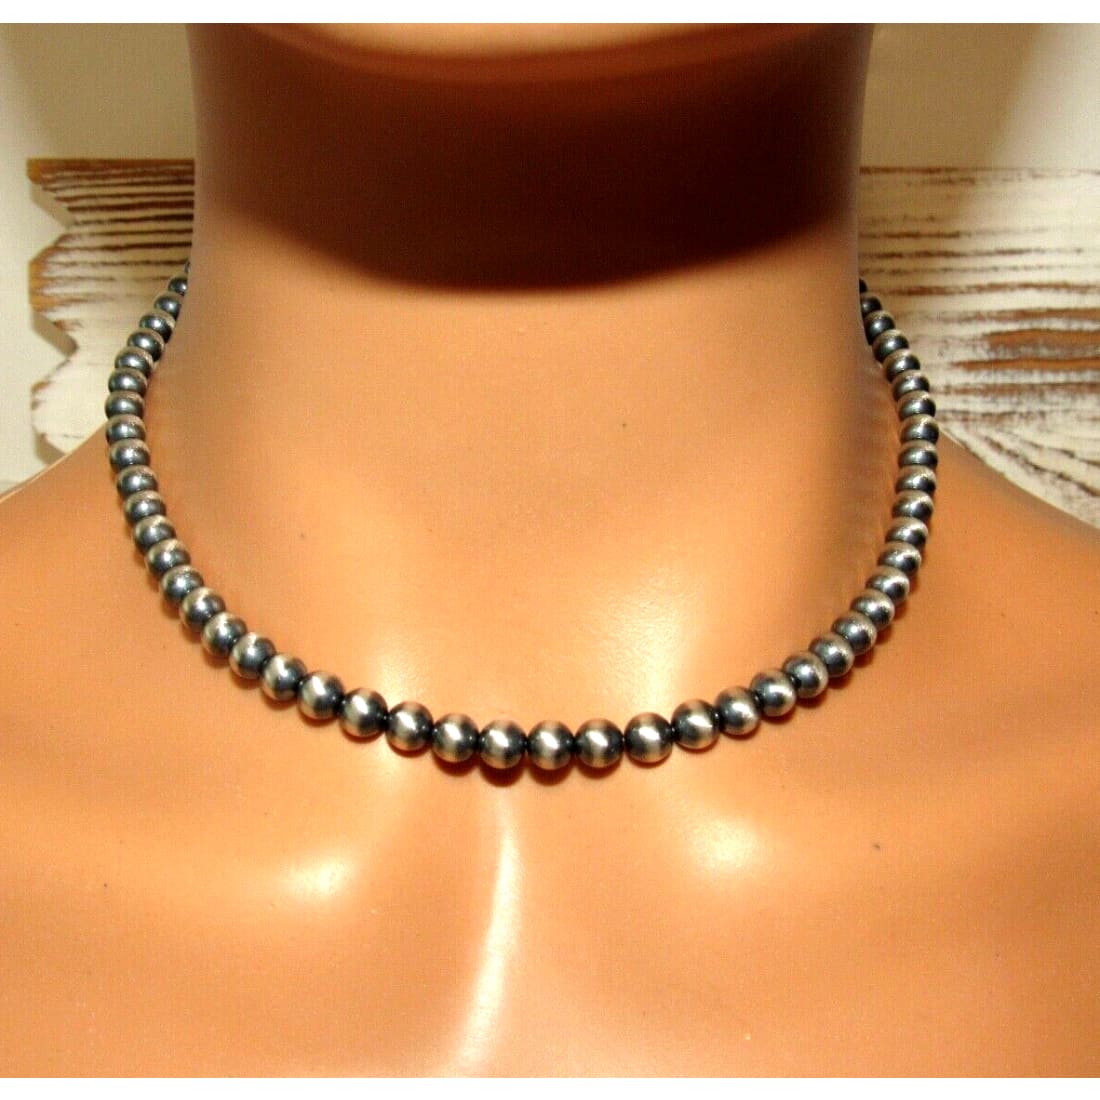 Navajo Pearls Necklace Sterling Silver 6mm Beads Necklace